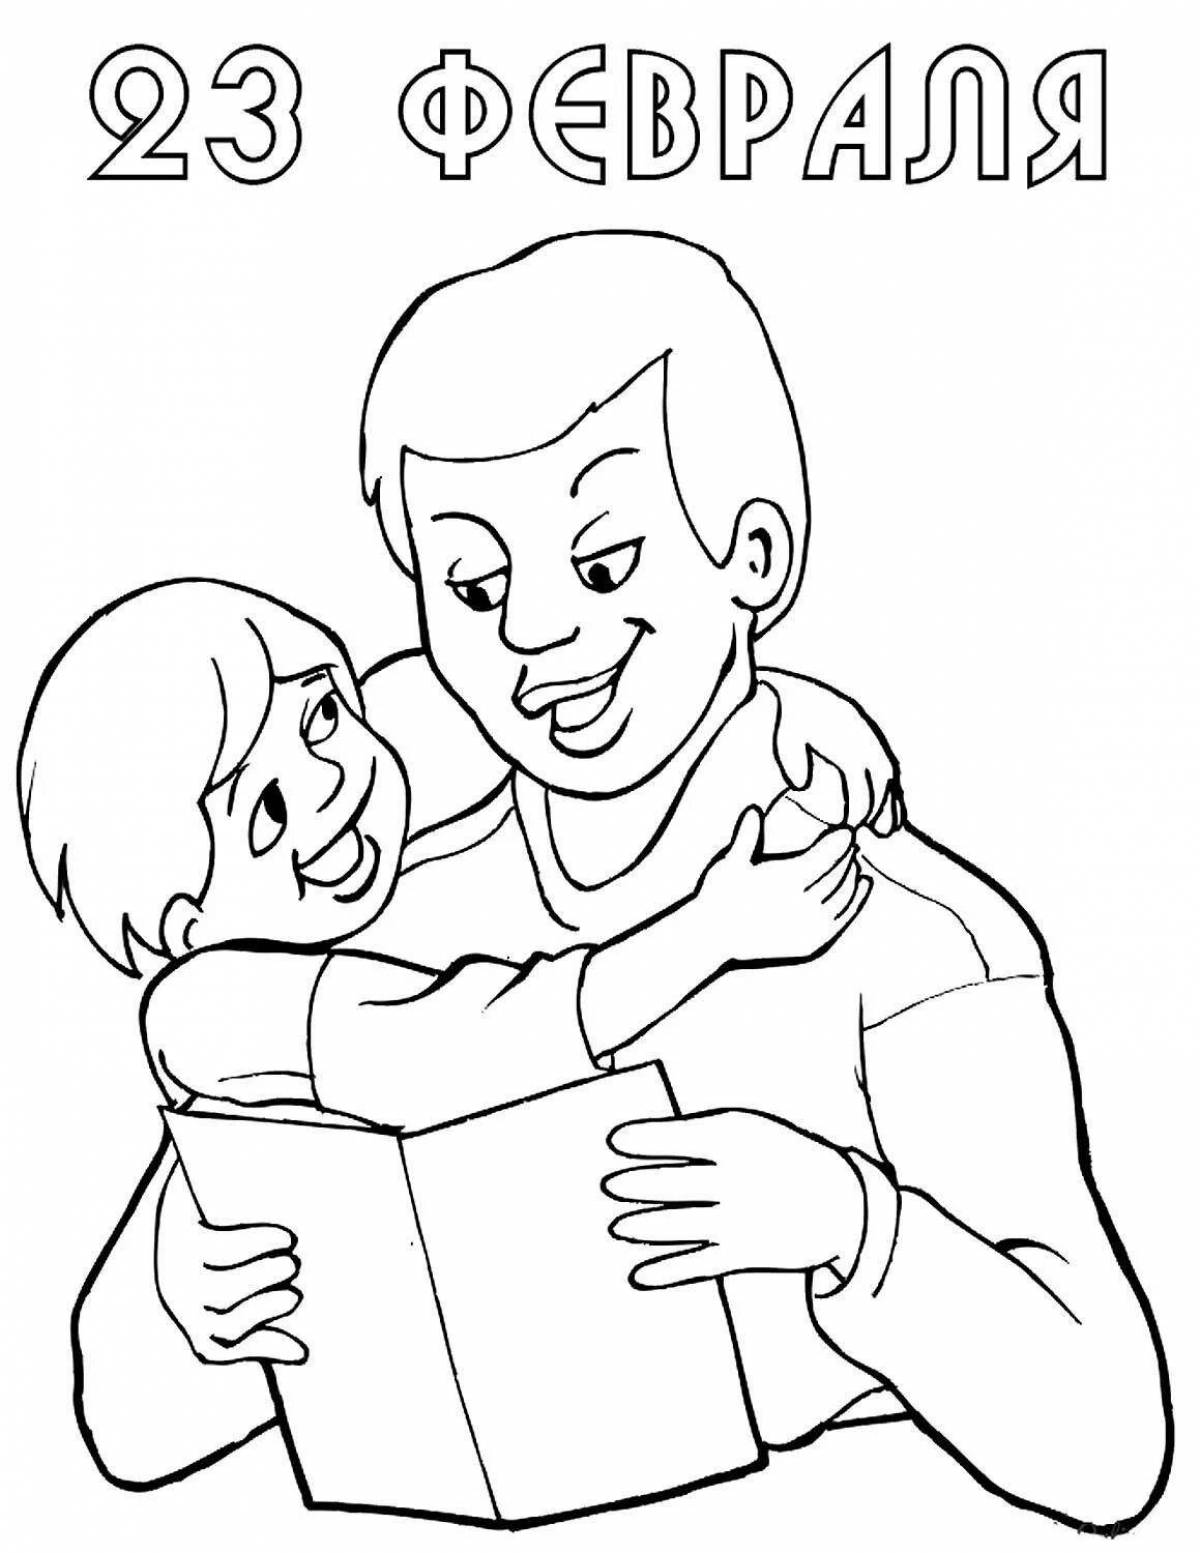 Cute son and dad coloring book